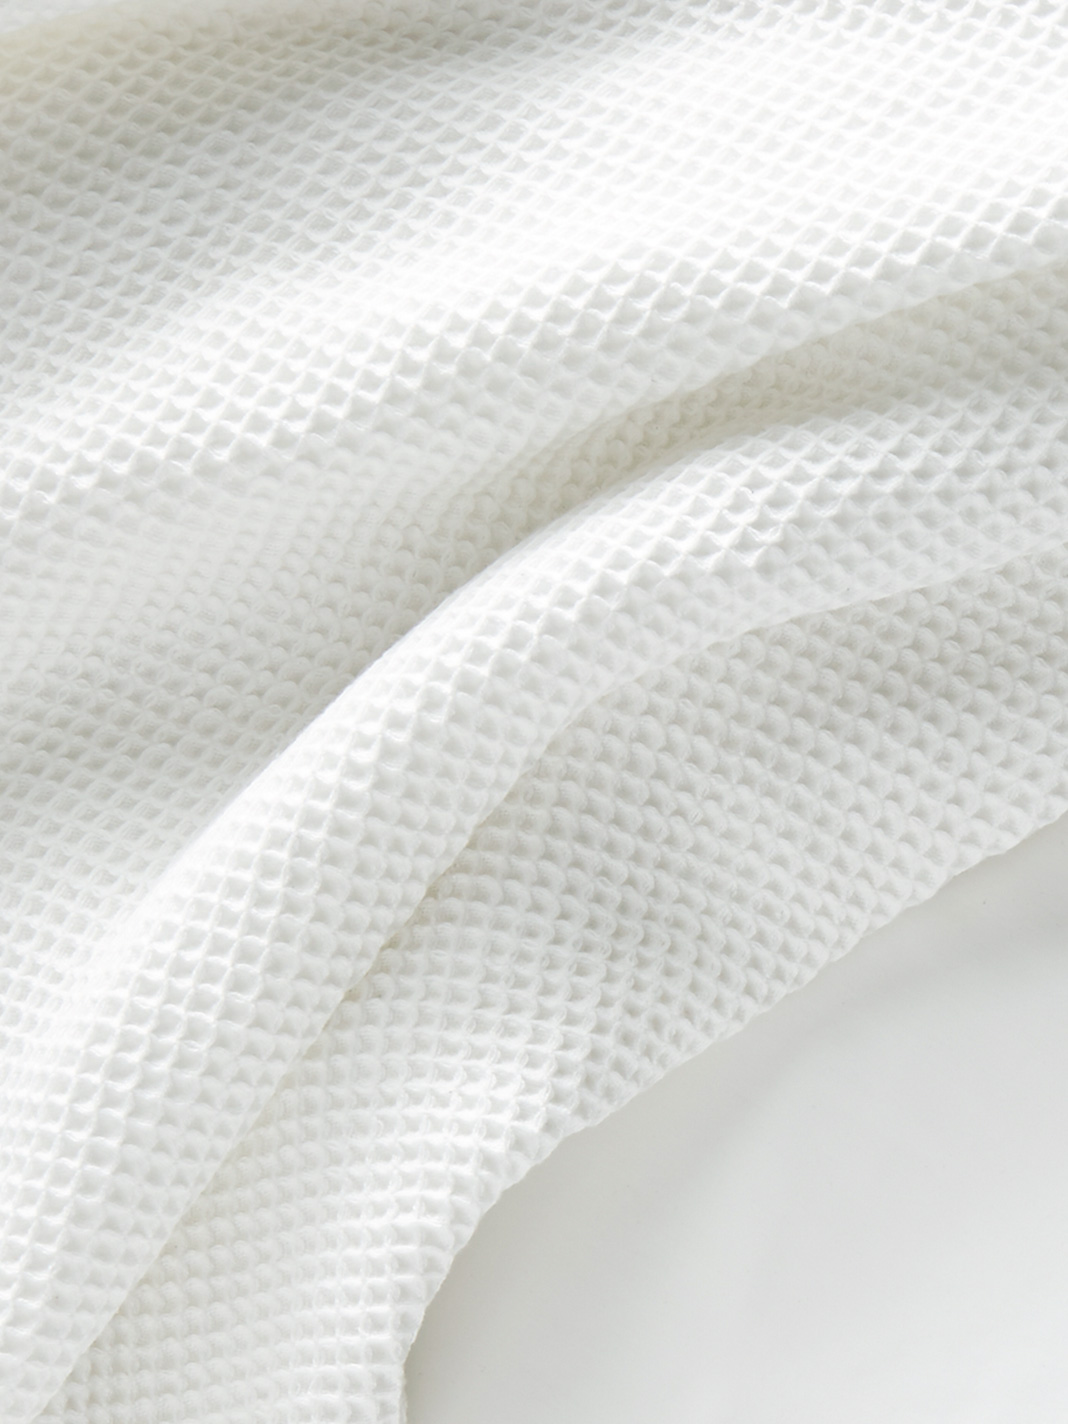 White Waffle Detail.jpg Limited-Edition Signature Fitted Sheet Bundle - Slide 22